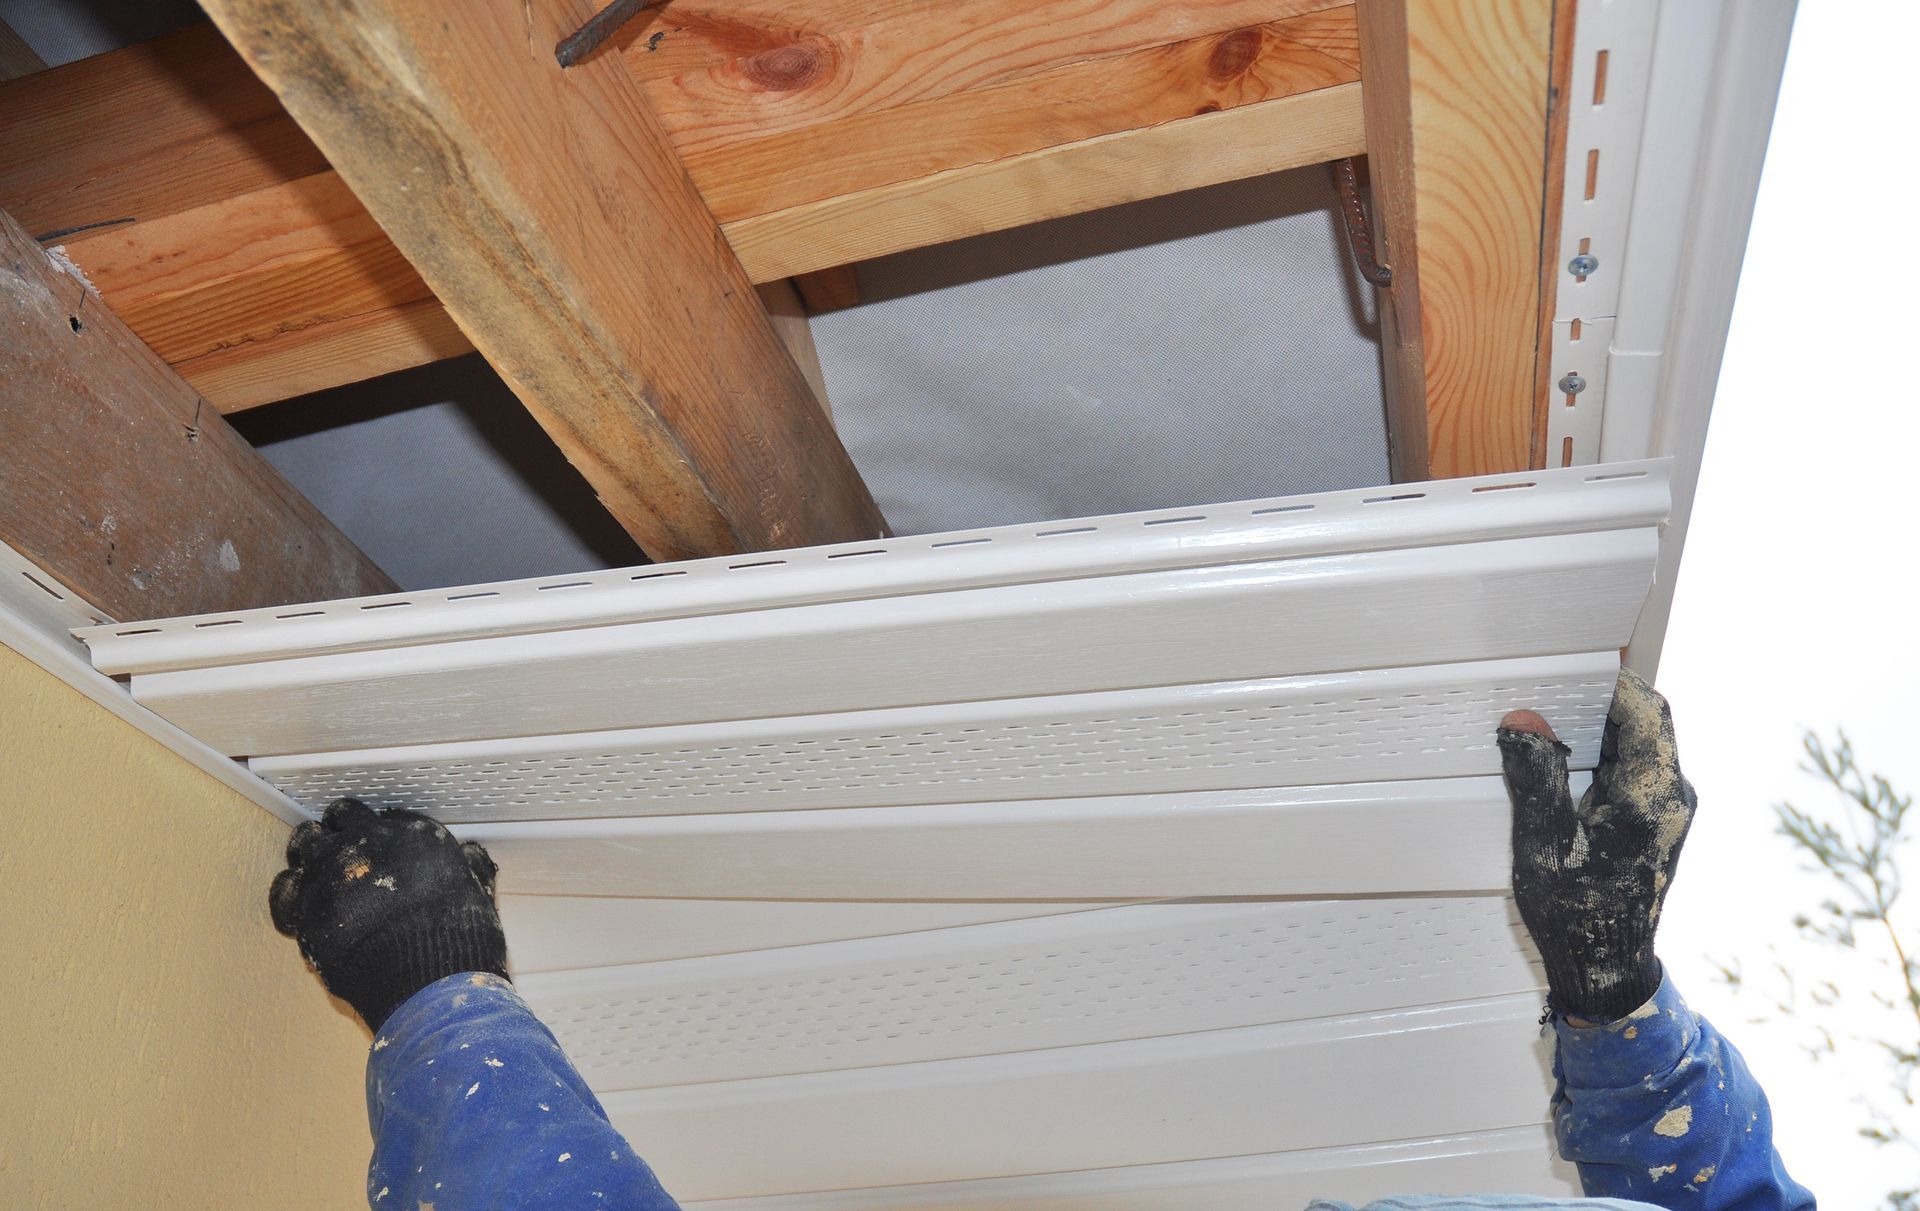 A person is installing siding on the ceiling of a house.